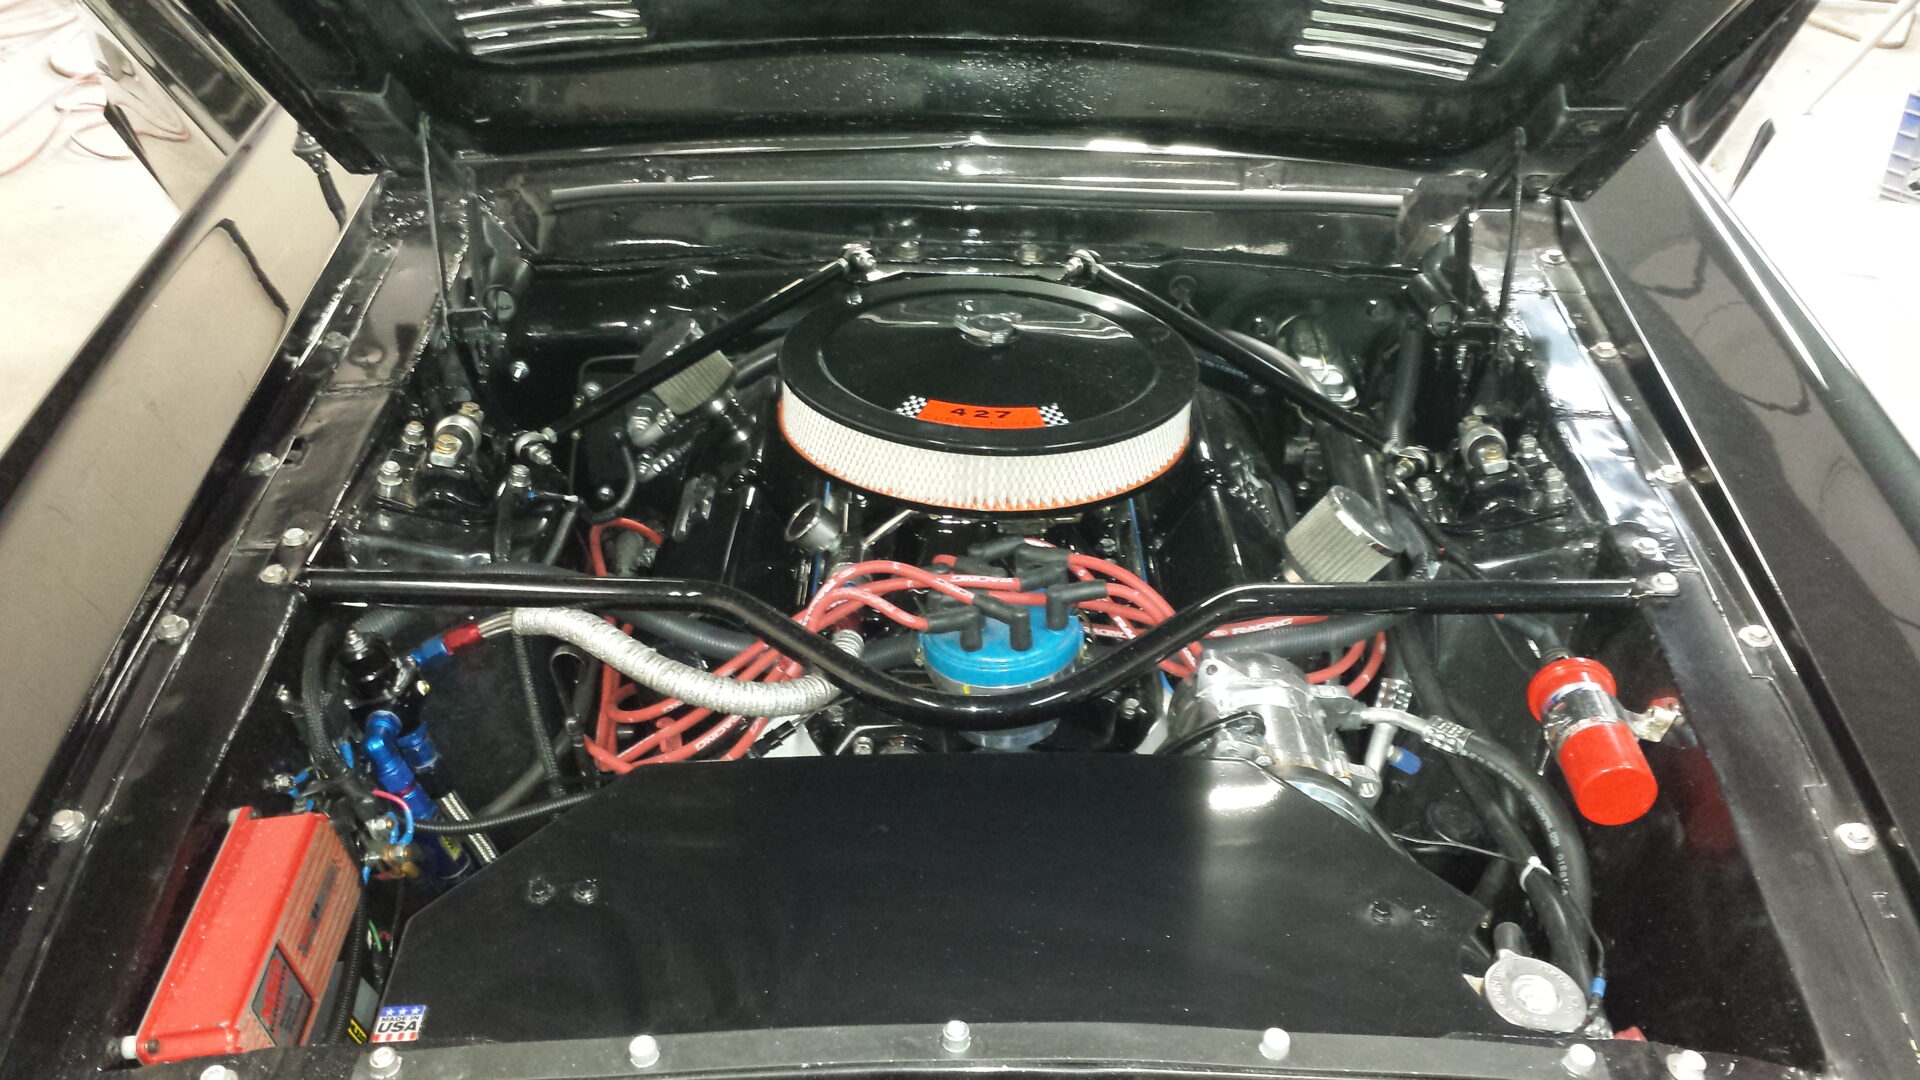 An engine of the 1967 Ford Mustang Fastback